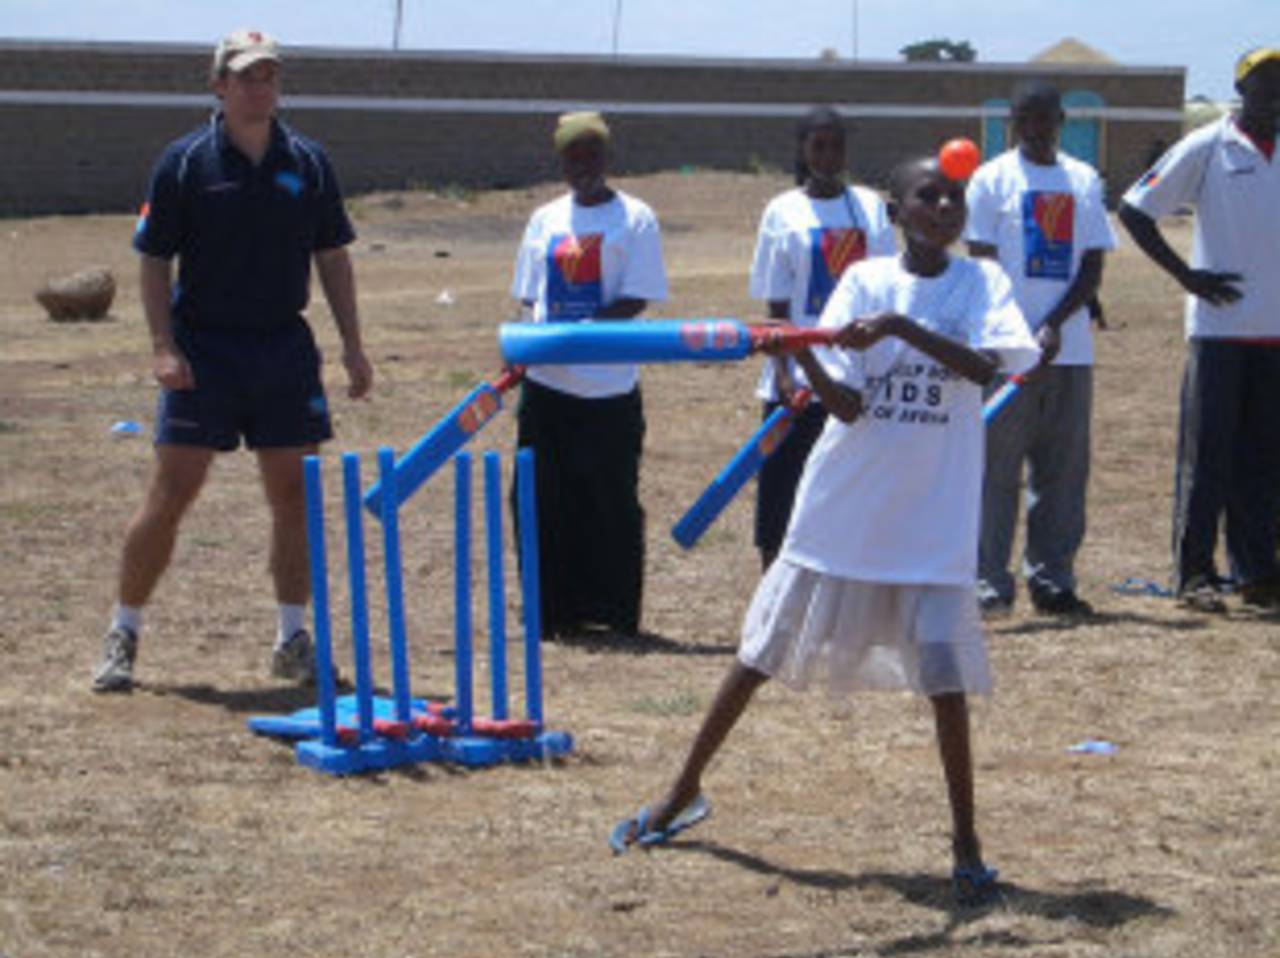 A young girl plays cricket in Thika, Kenya